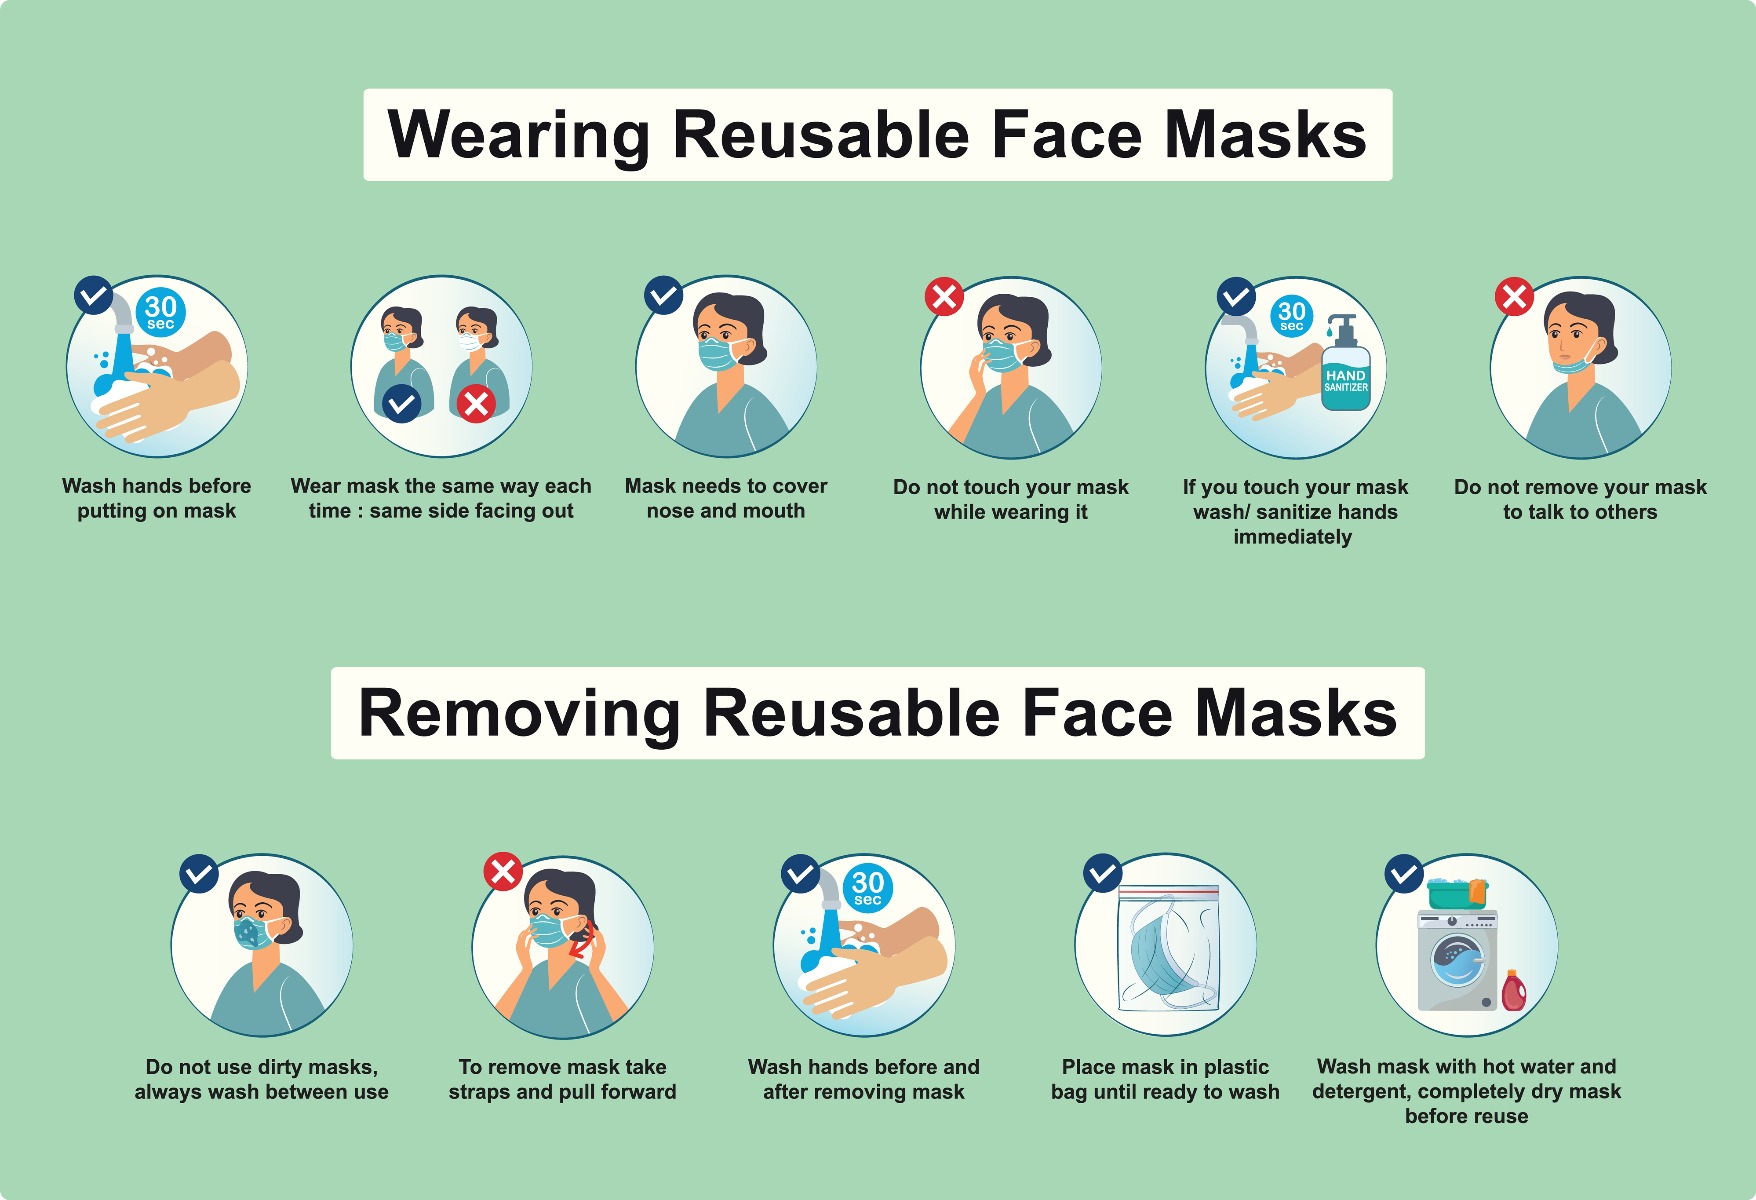 wearing and removing masks guide